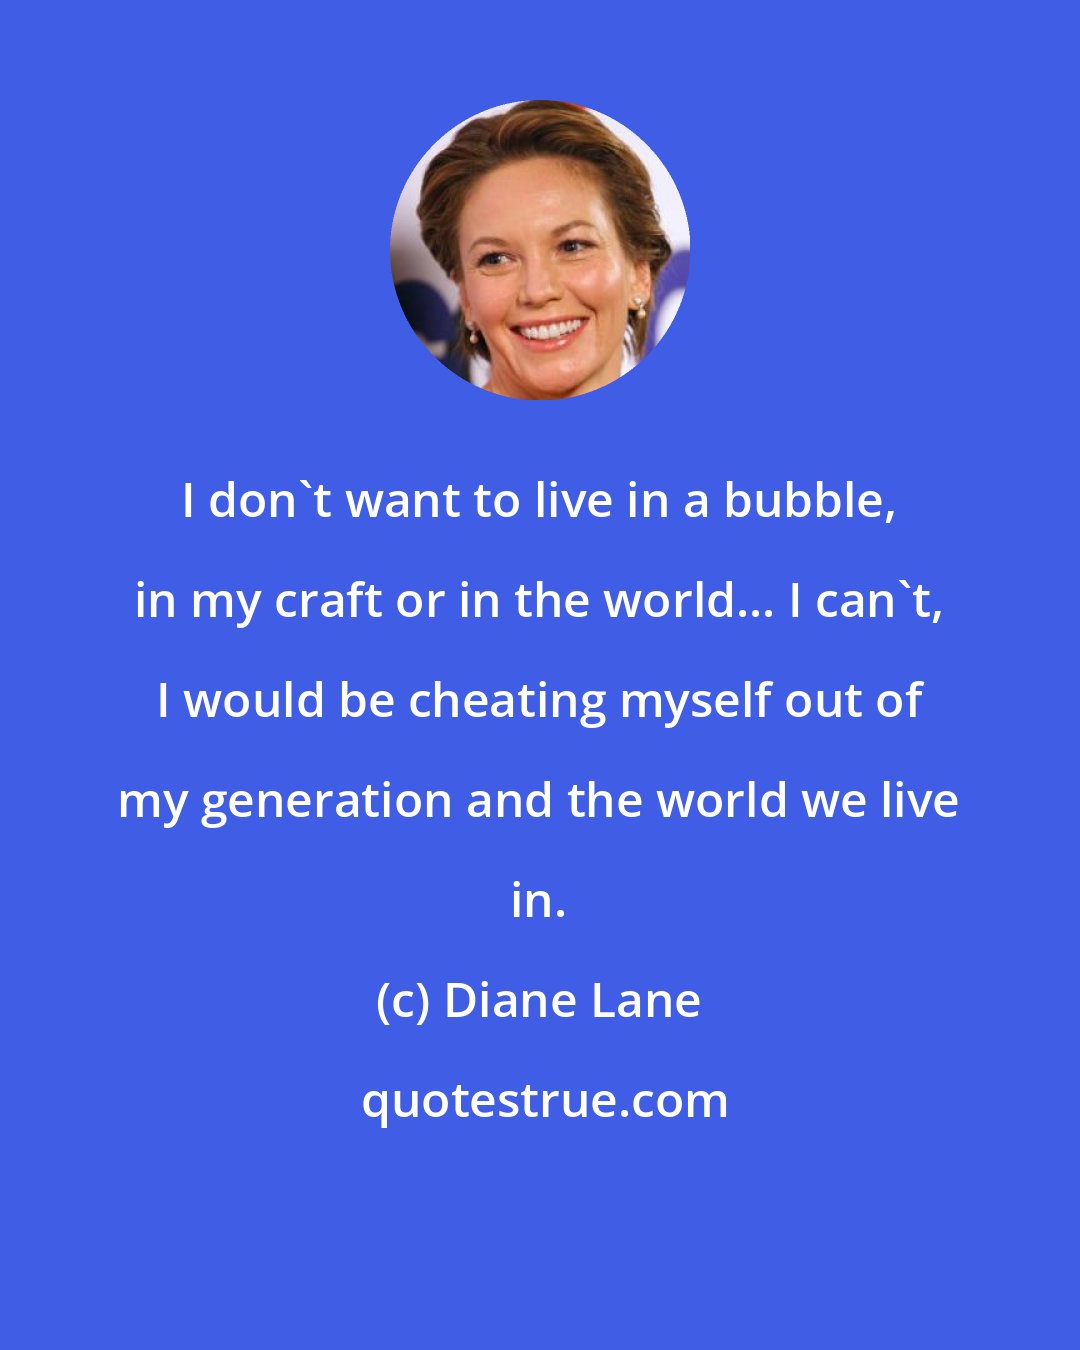 Diane Lane: I don't want to live in a bubble, in my craft or in the world... I can't, I would be cheating myself out of my generation and the world we live in.